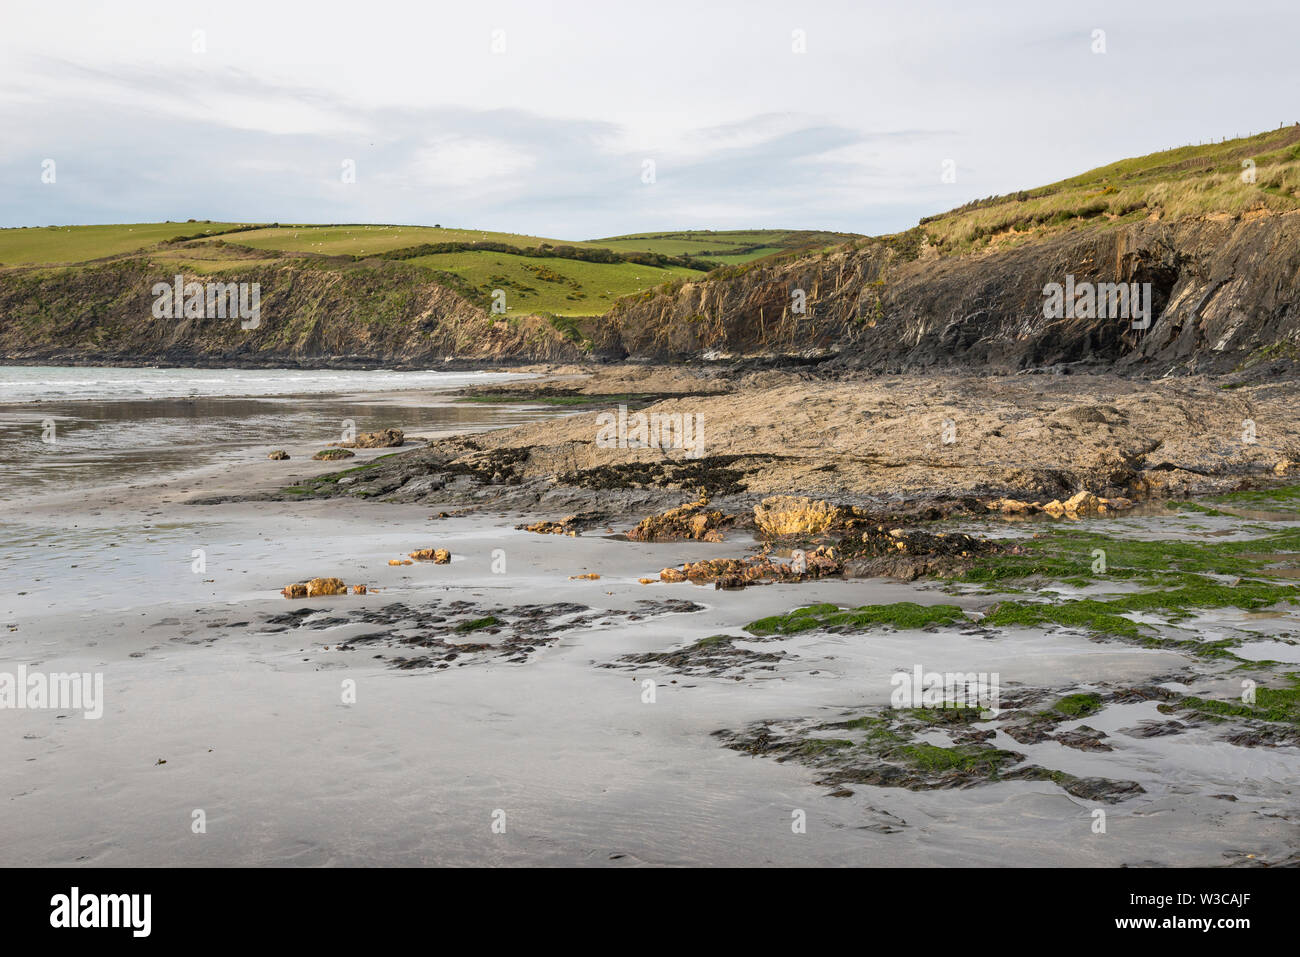 High cliffs at Newport Sands on the coast of Pembrokeshire, Wales. Stock Photo